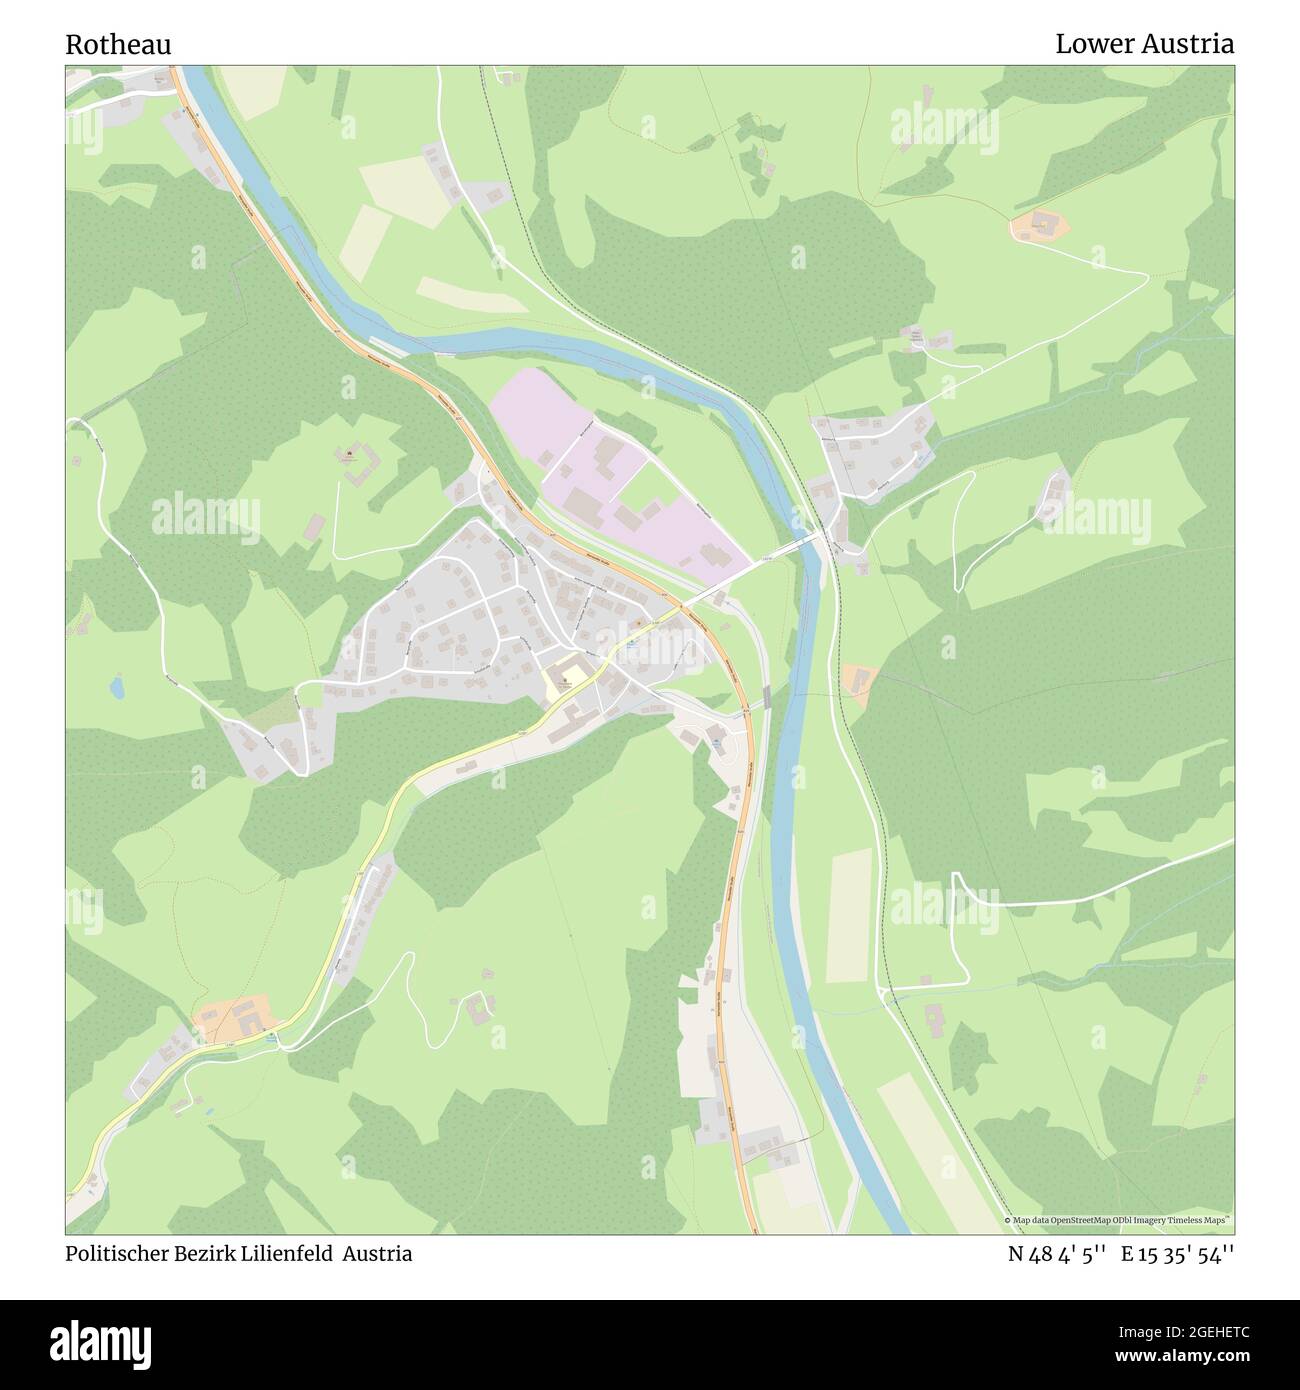 Rotheau, Politischer Bezirk Lilienfeld, Austria, Lower Austria, N 48 4' 5'', E 15 35' 54'', map, Timeless Map published in 2021. Travelers, explorers and adventurers like Florence Nightingale, David Livingstone, Ernest Shackleton, Lewis and Clark and Sherlock Holmes relied on maps to plan travels to the world's most remote corners, Timeless Maps is mapping most locations on the globe, showing the achievement of great dreams Stock Photo